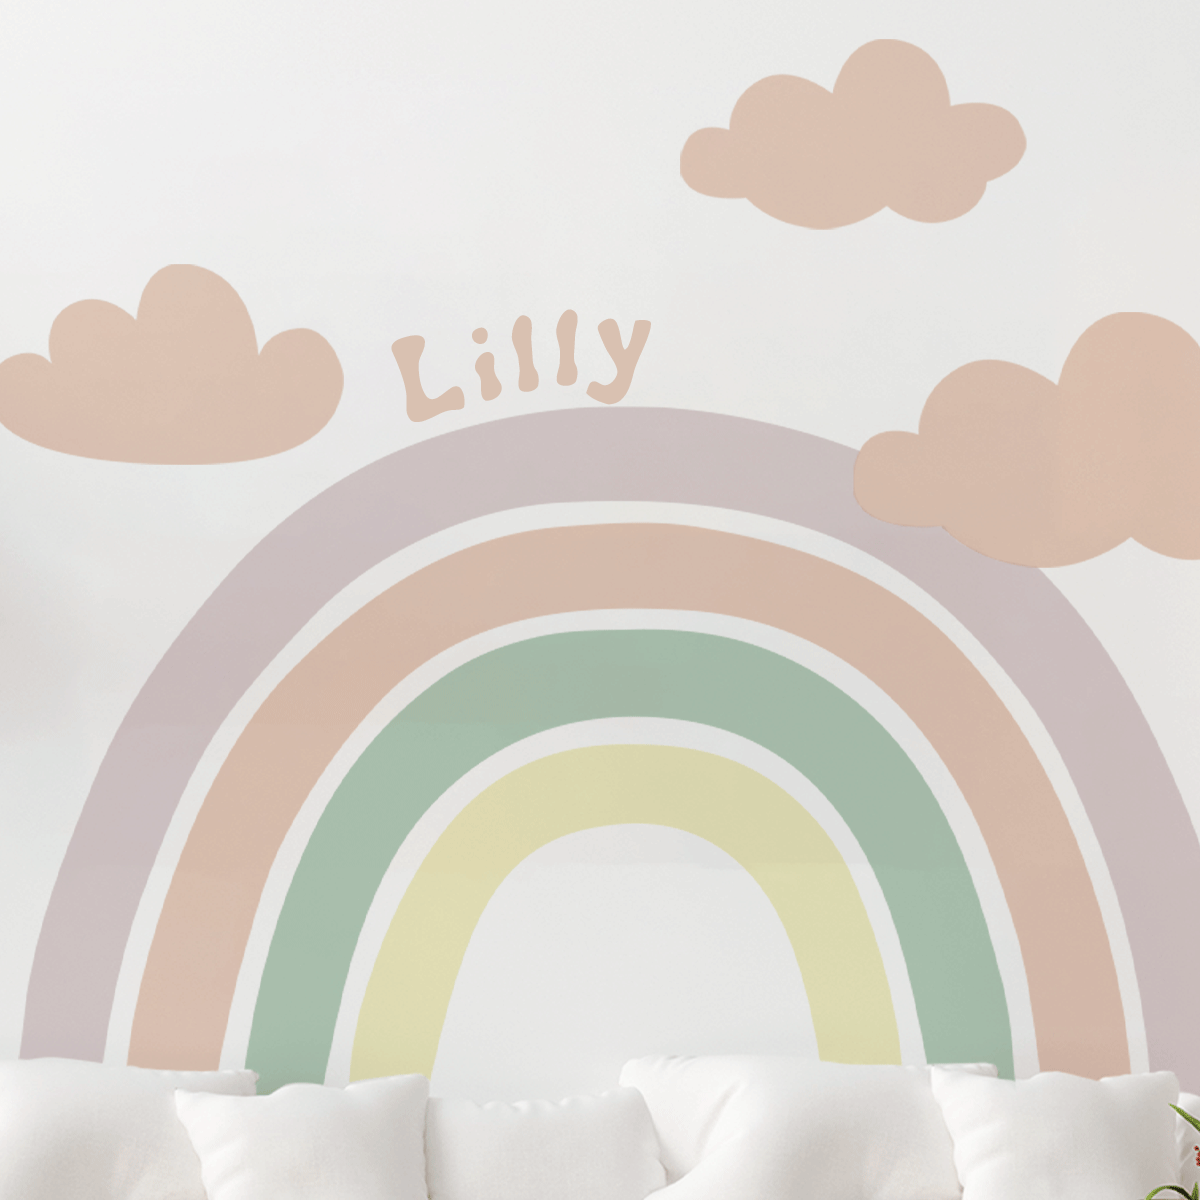 A personalised print or wall magic. MICA-MICA a adds sticker special –